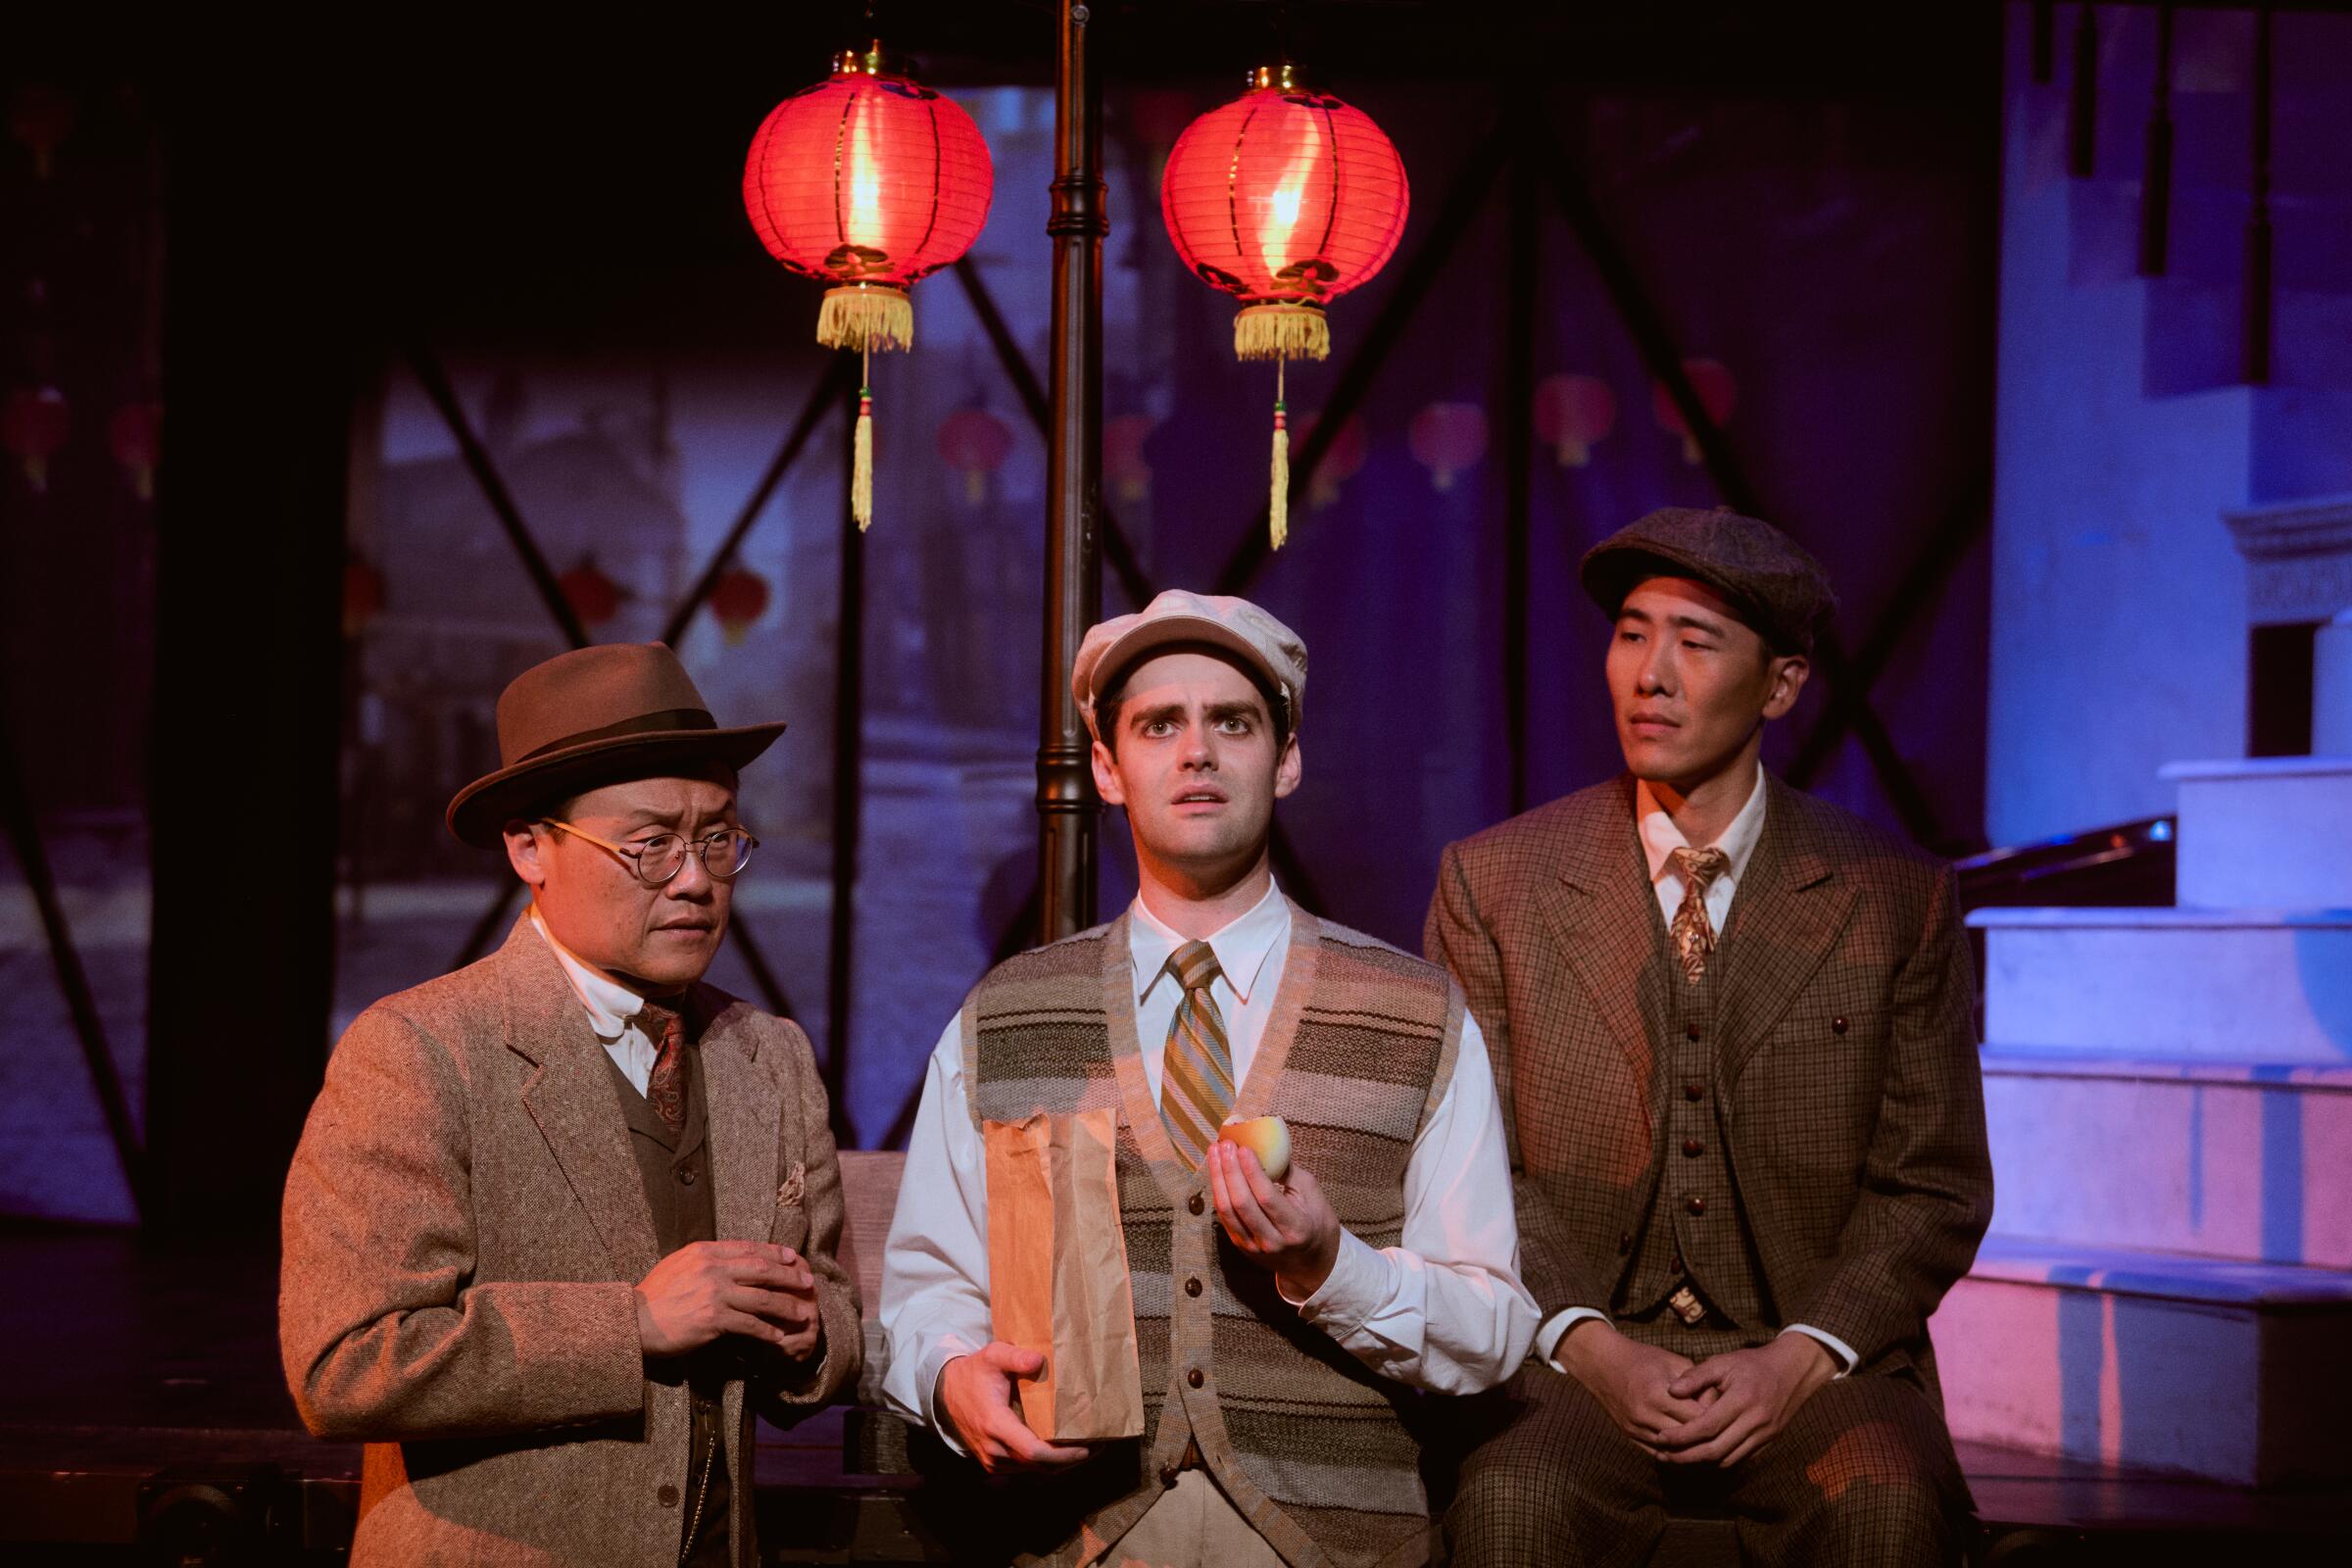 Three men stand onstage in front of Chinese lanterns